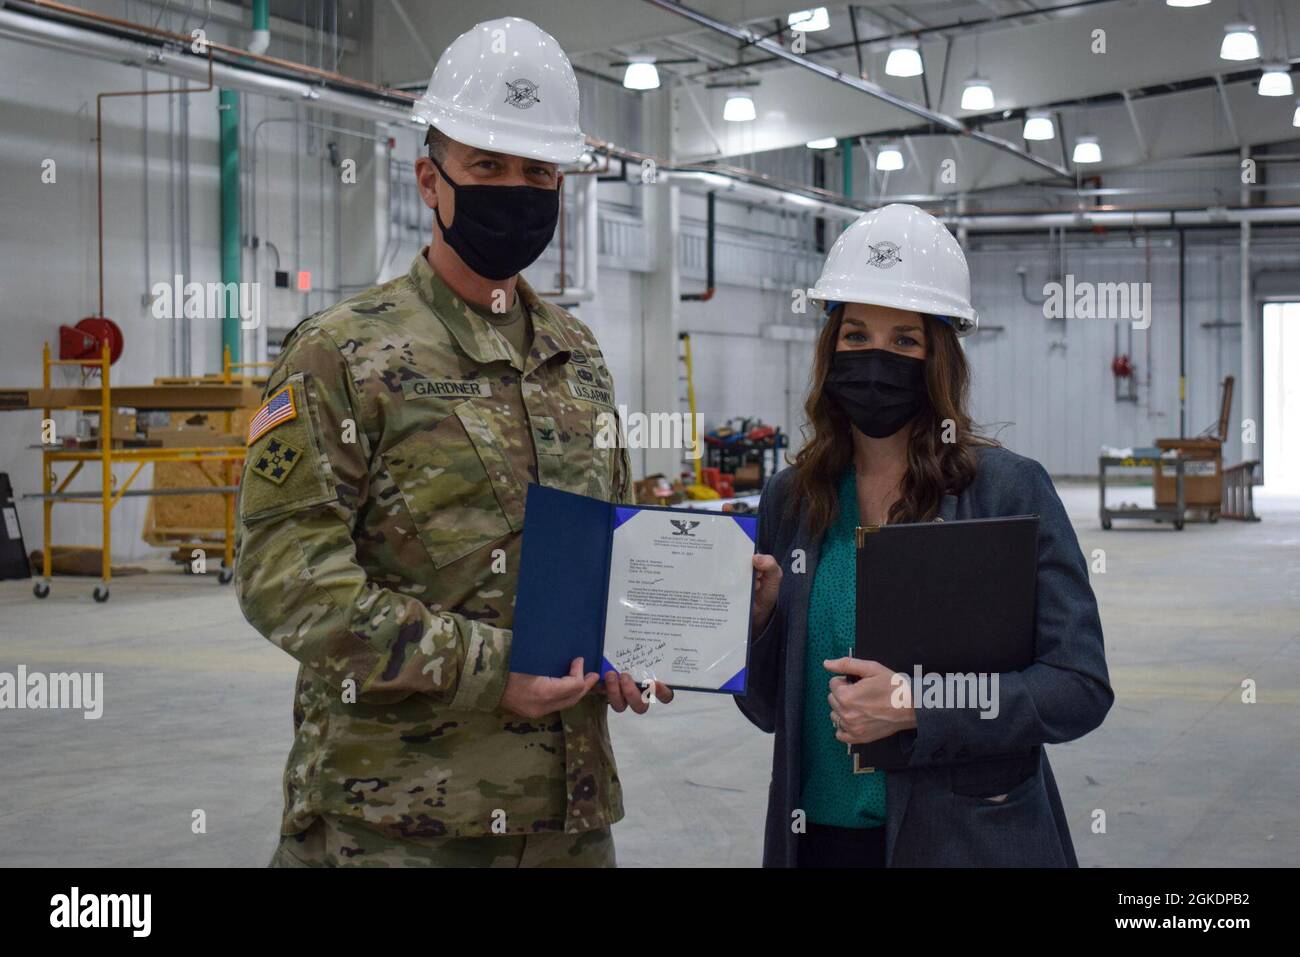 Col. Gavin Gardner, commander of Joint Munitions Command, recognized a variety of Crane Army employees during his visit to the activity, including presenting Lauren Shipman, civil engineer, with a commander’s challenge coin and a commendation letter for her work on the new shipping and receiving facility, slated to open in the summer of 2021. Shipman, Greg Edwards, supervisory supply management specialist, and Matt McGowen, depot operations director, showed Gardner around the facility, which includes in-house inspection bays to streamline the process of moving received munitions to proper stor Stock Photo